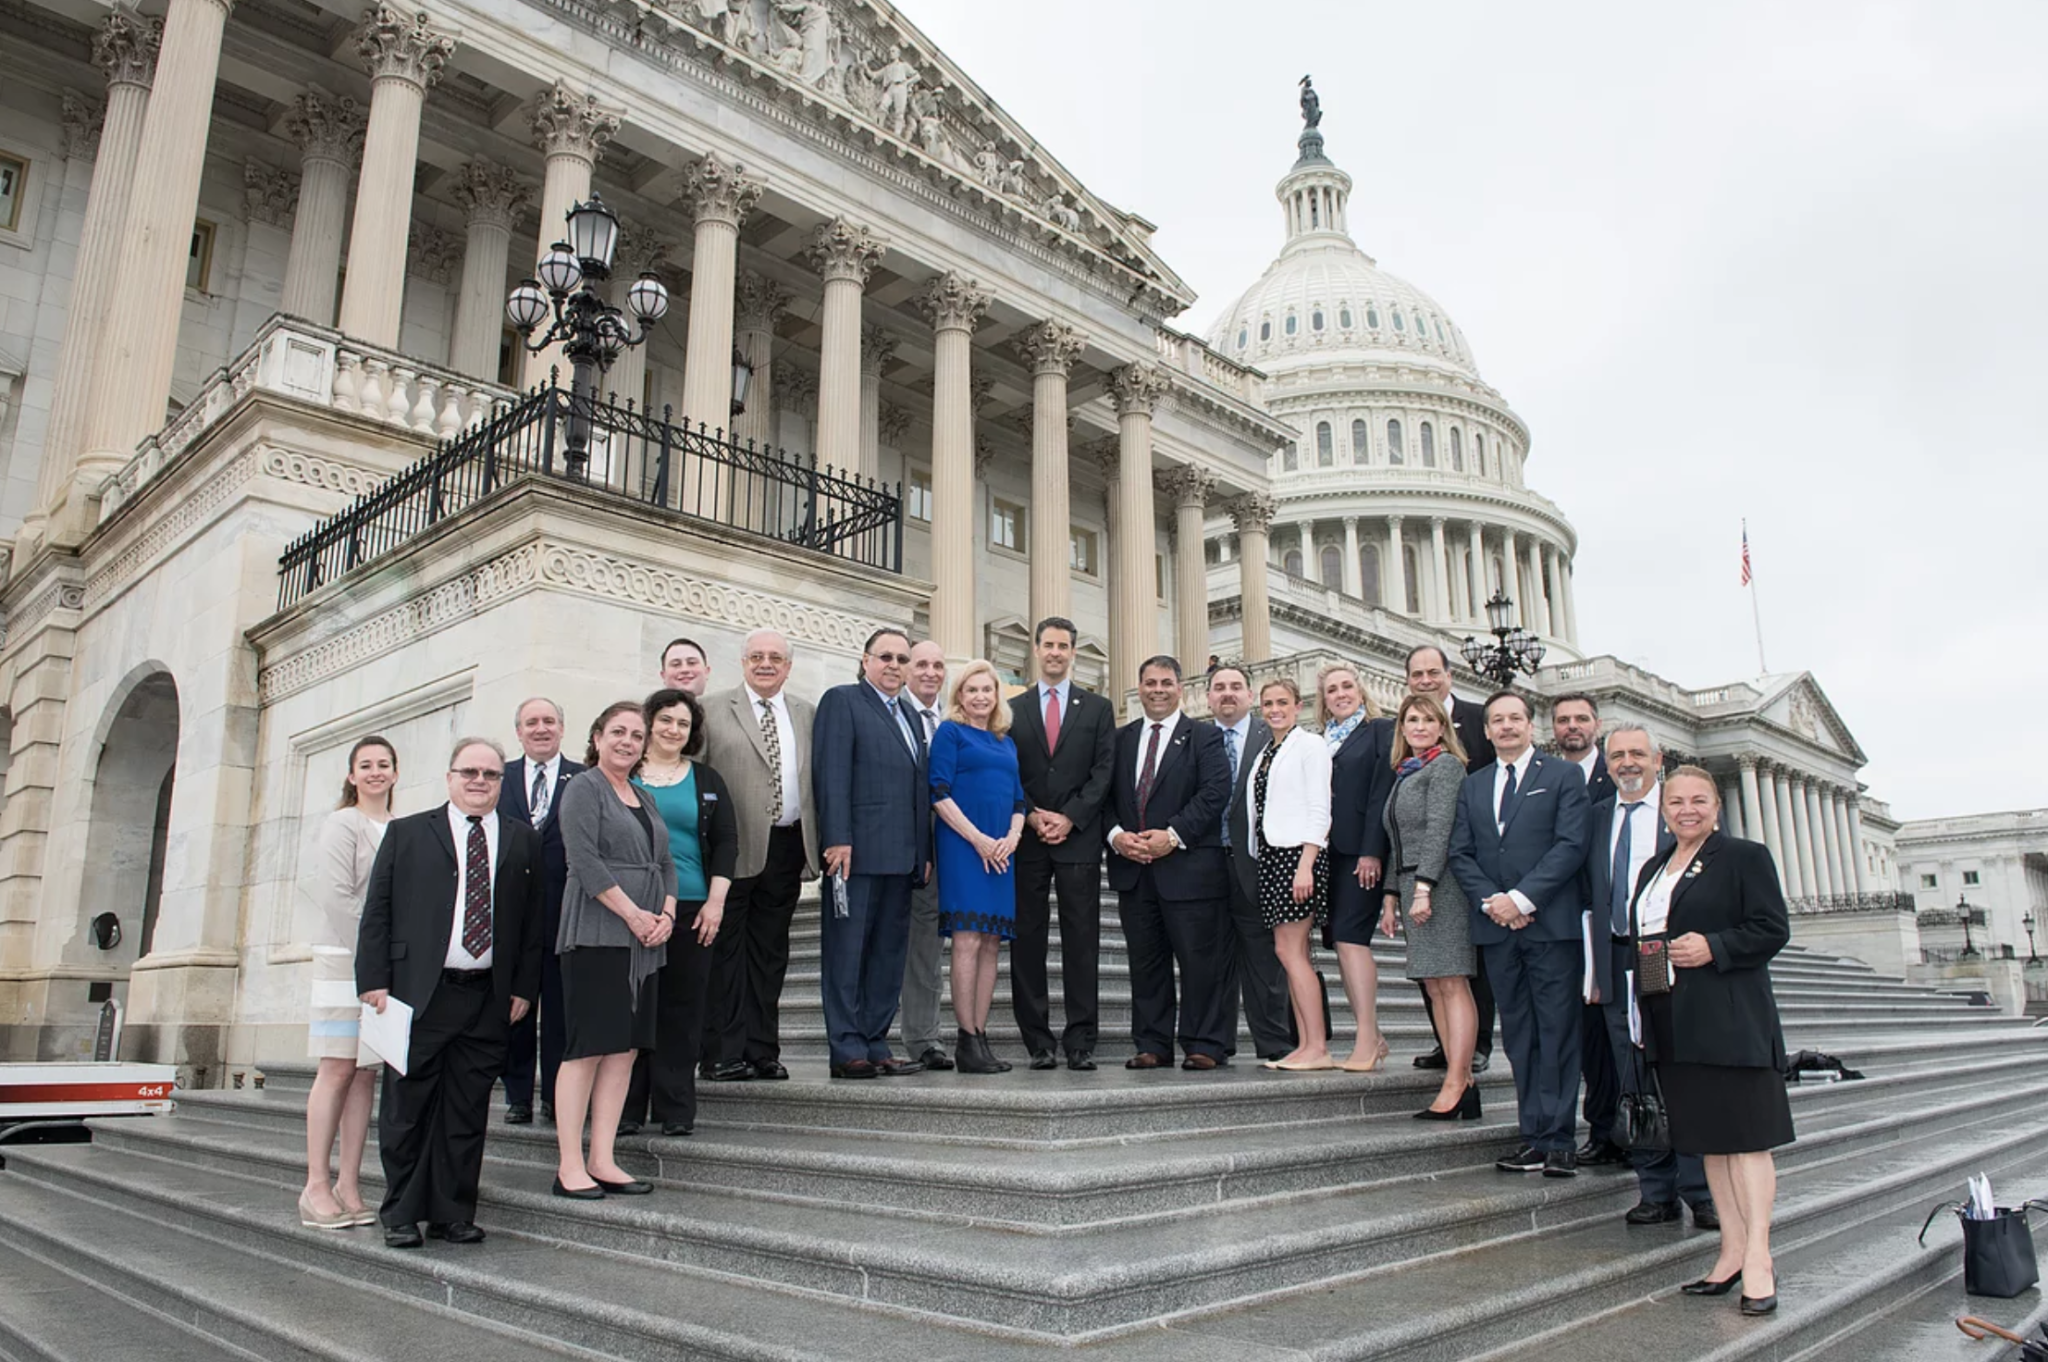 Greek Americans Bring Policy Priorities to Capitol Hill